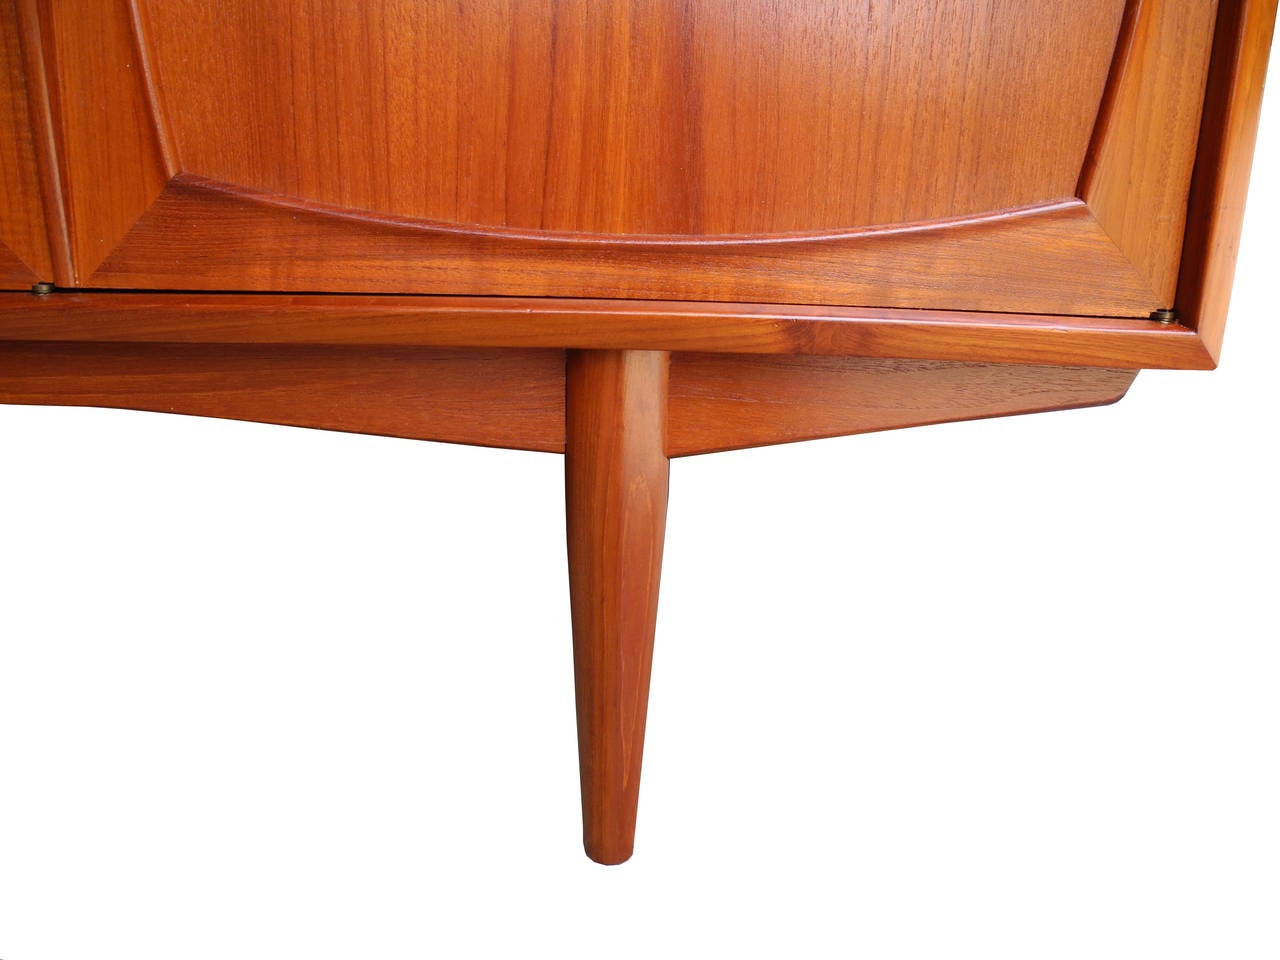 Four-Door Danish Modern Teak Sideboard or Credenza by Johannes Andersen In Good Condition For Sale In Hudson, NY